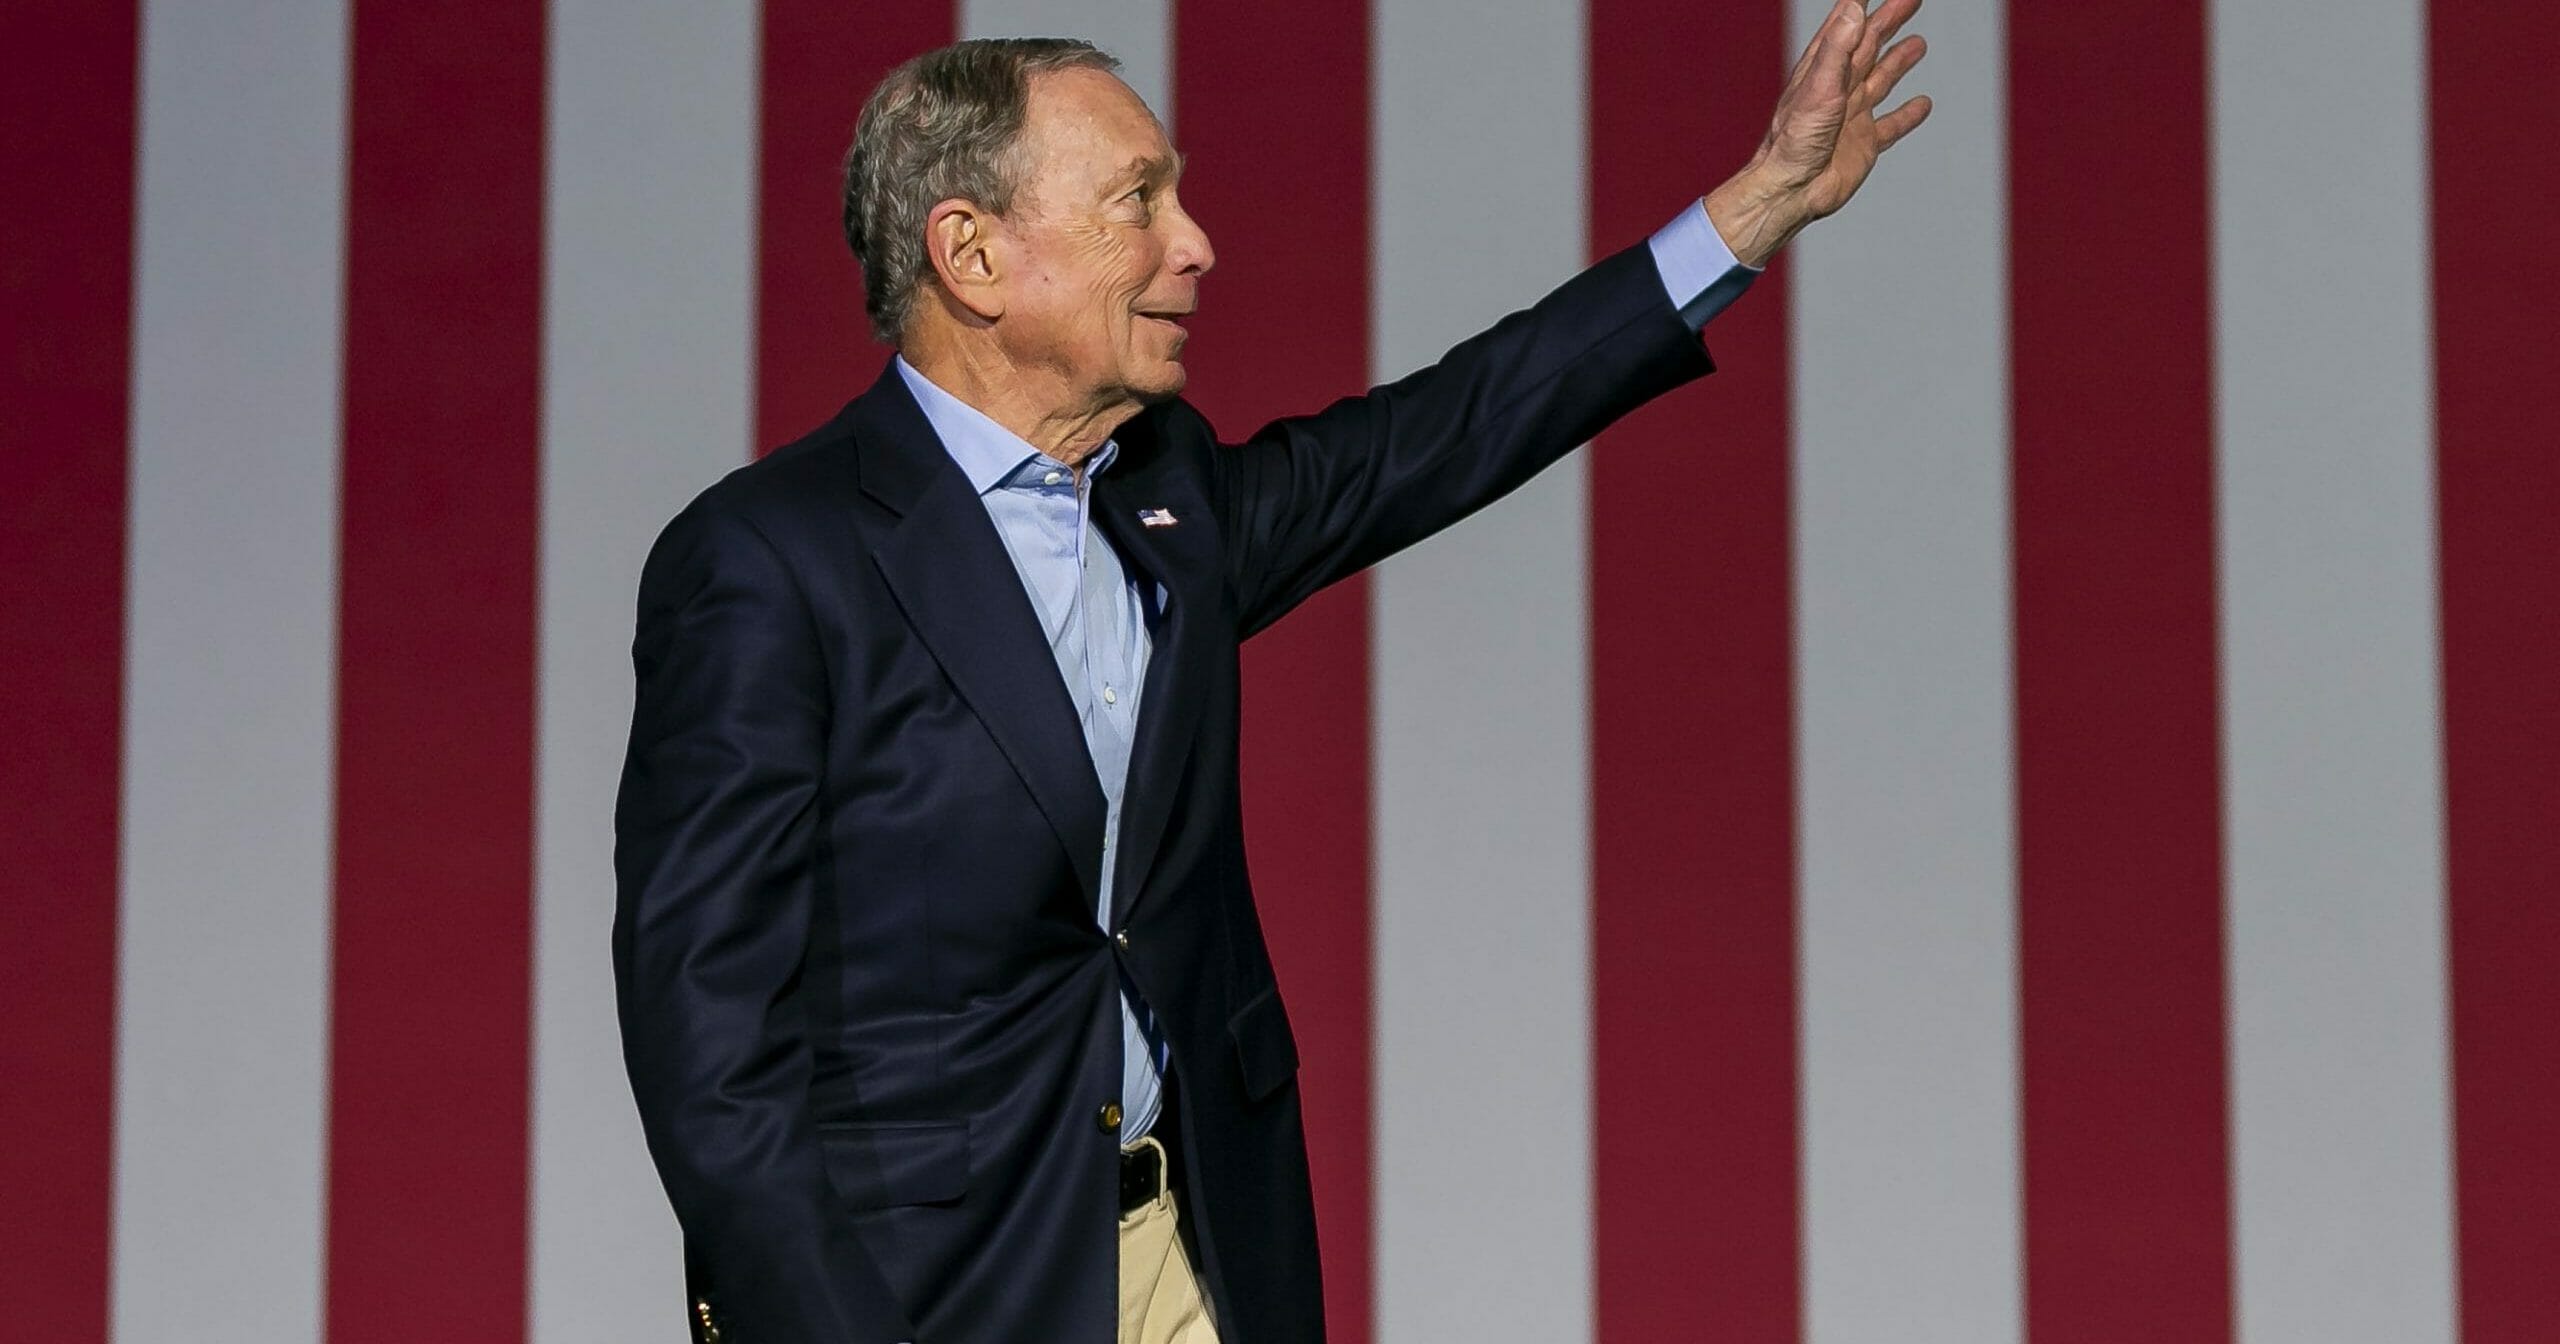 Democratic presidential candidate Mike Bloomberg waves to supporters as he arrives to his campaign rally at the Palm Beach County Convention Center in West Palm Beach, Florida, on March 3, 2020.